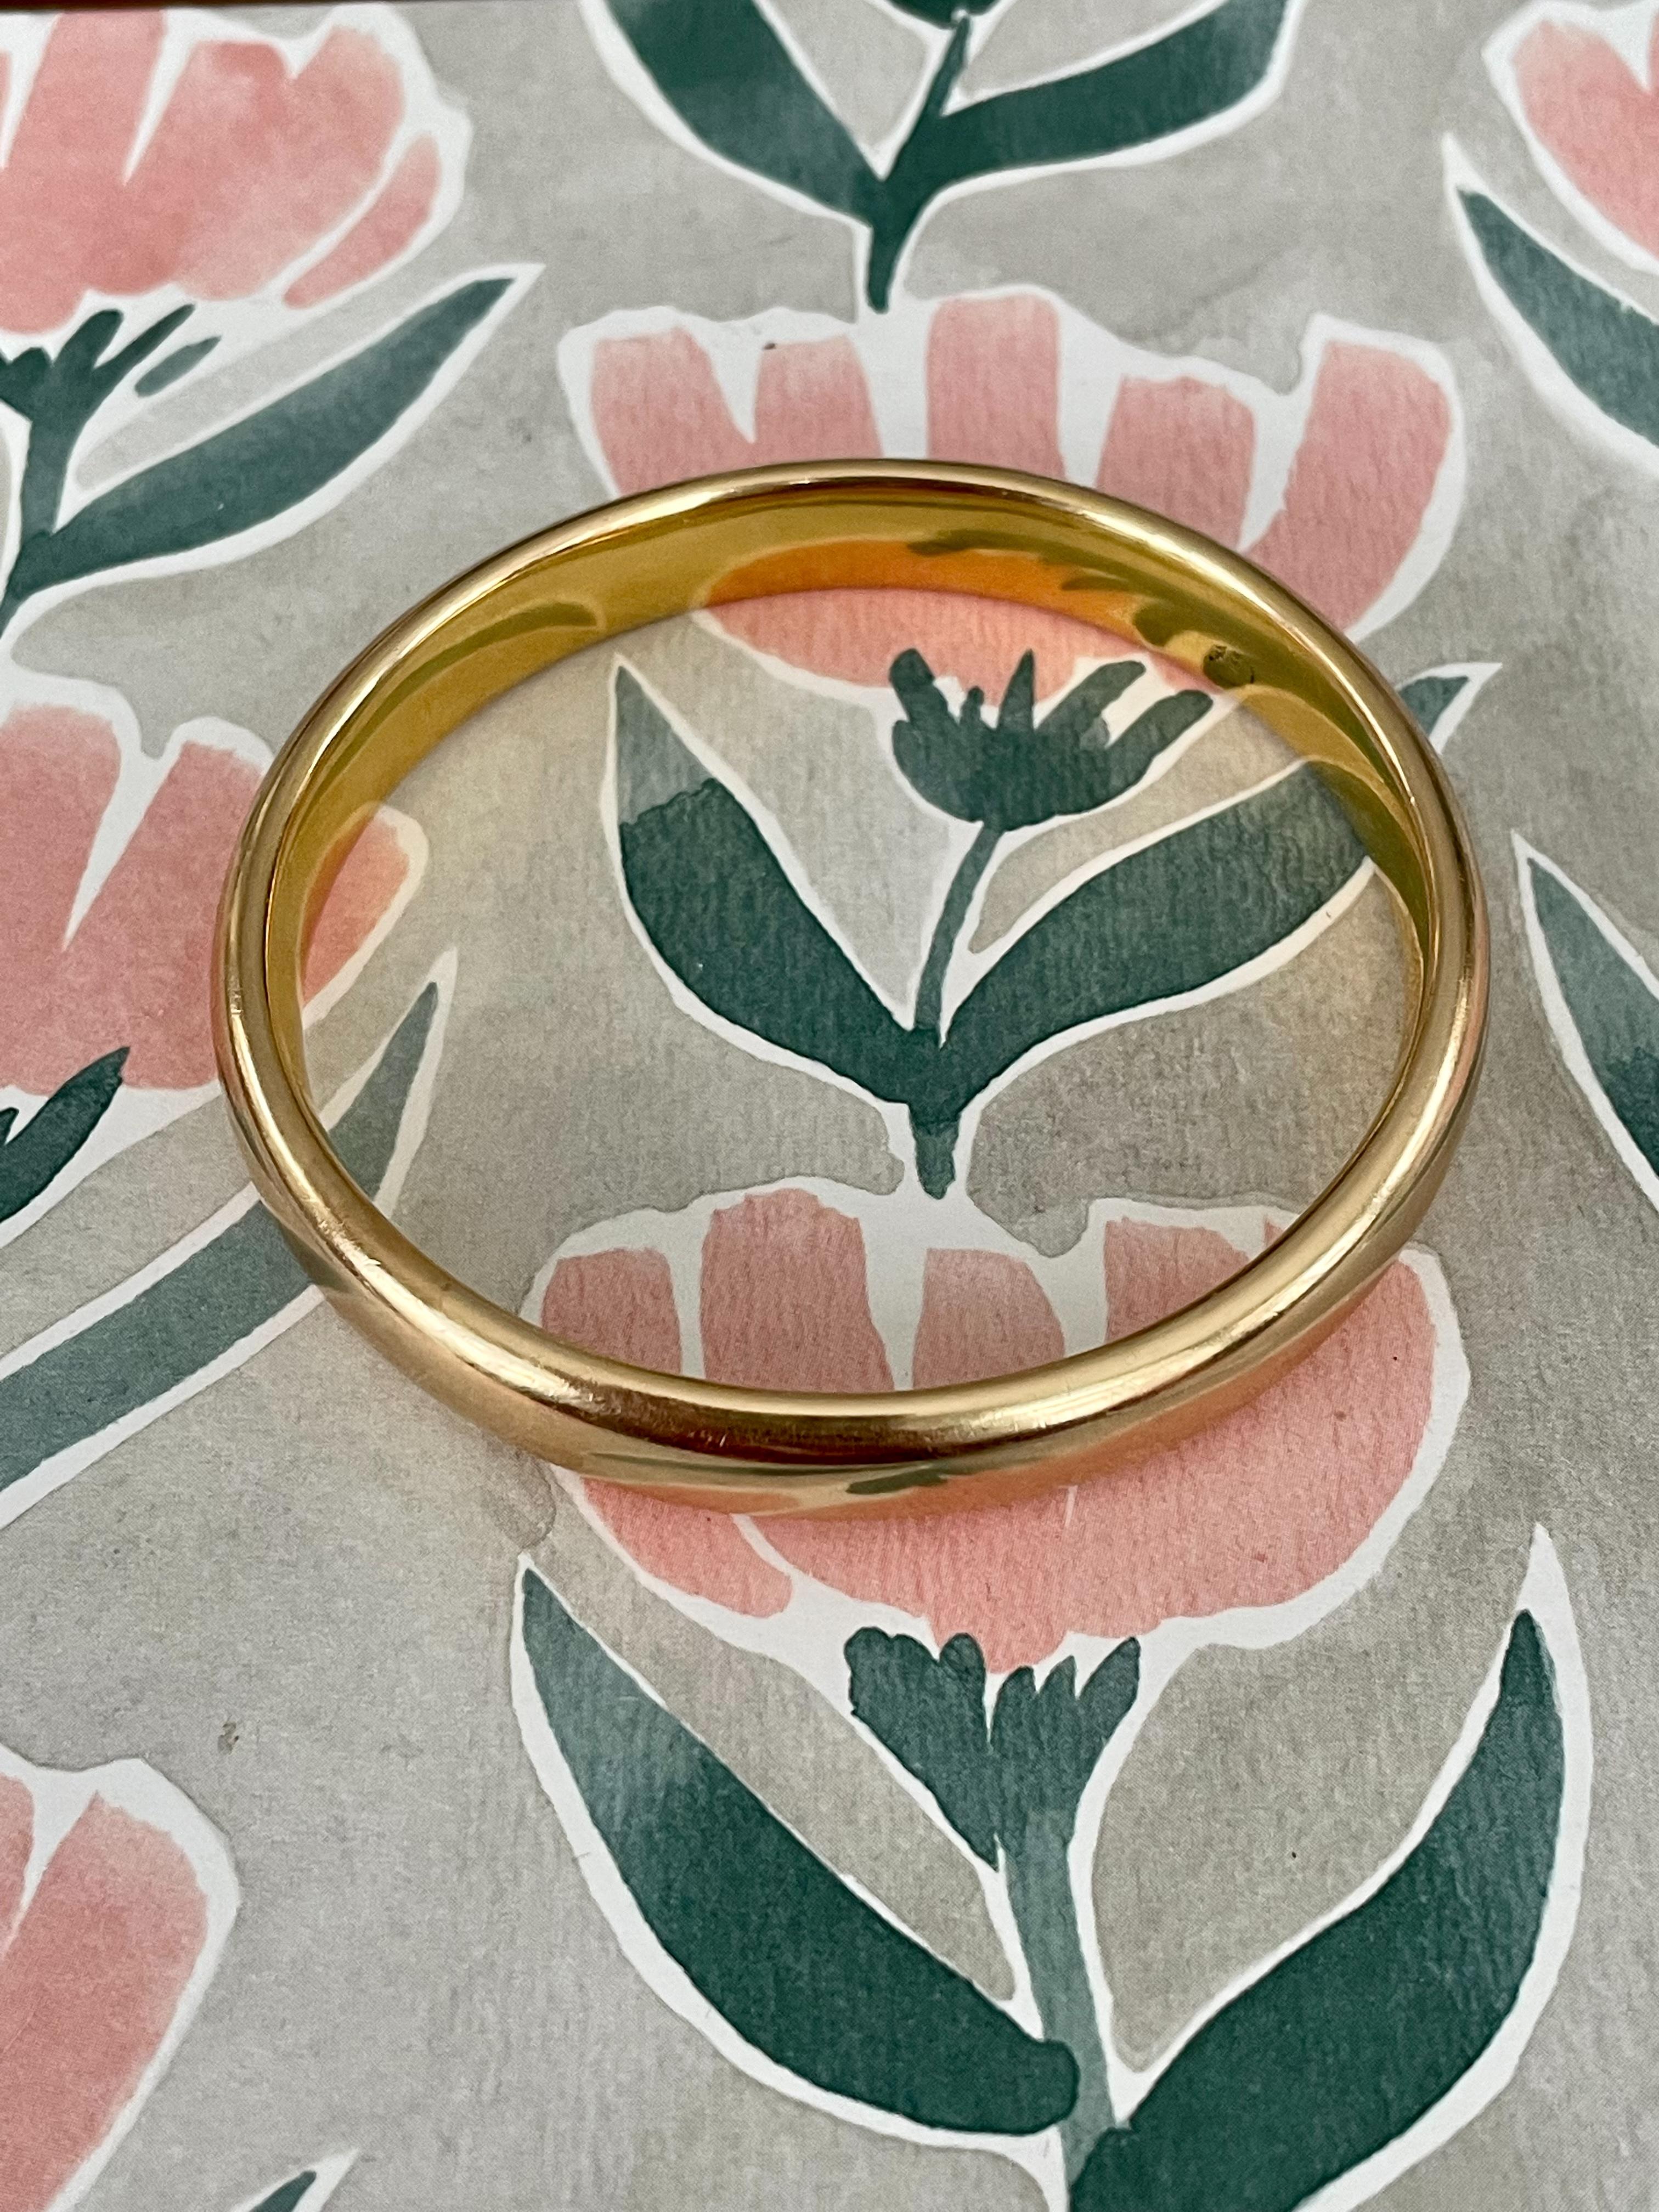 This a vintage Riker Brothers 14K Yellow Gold Bangle.  This bangle not have any engravings . 
 It is perfect for everyday or to go with stacking.  There is no hinge on the bangle.

Stamp: 14K  with the Riker trademark 

Dimensions: Inside diameter